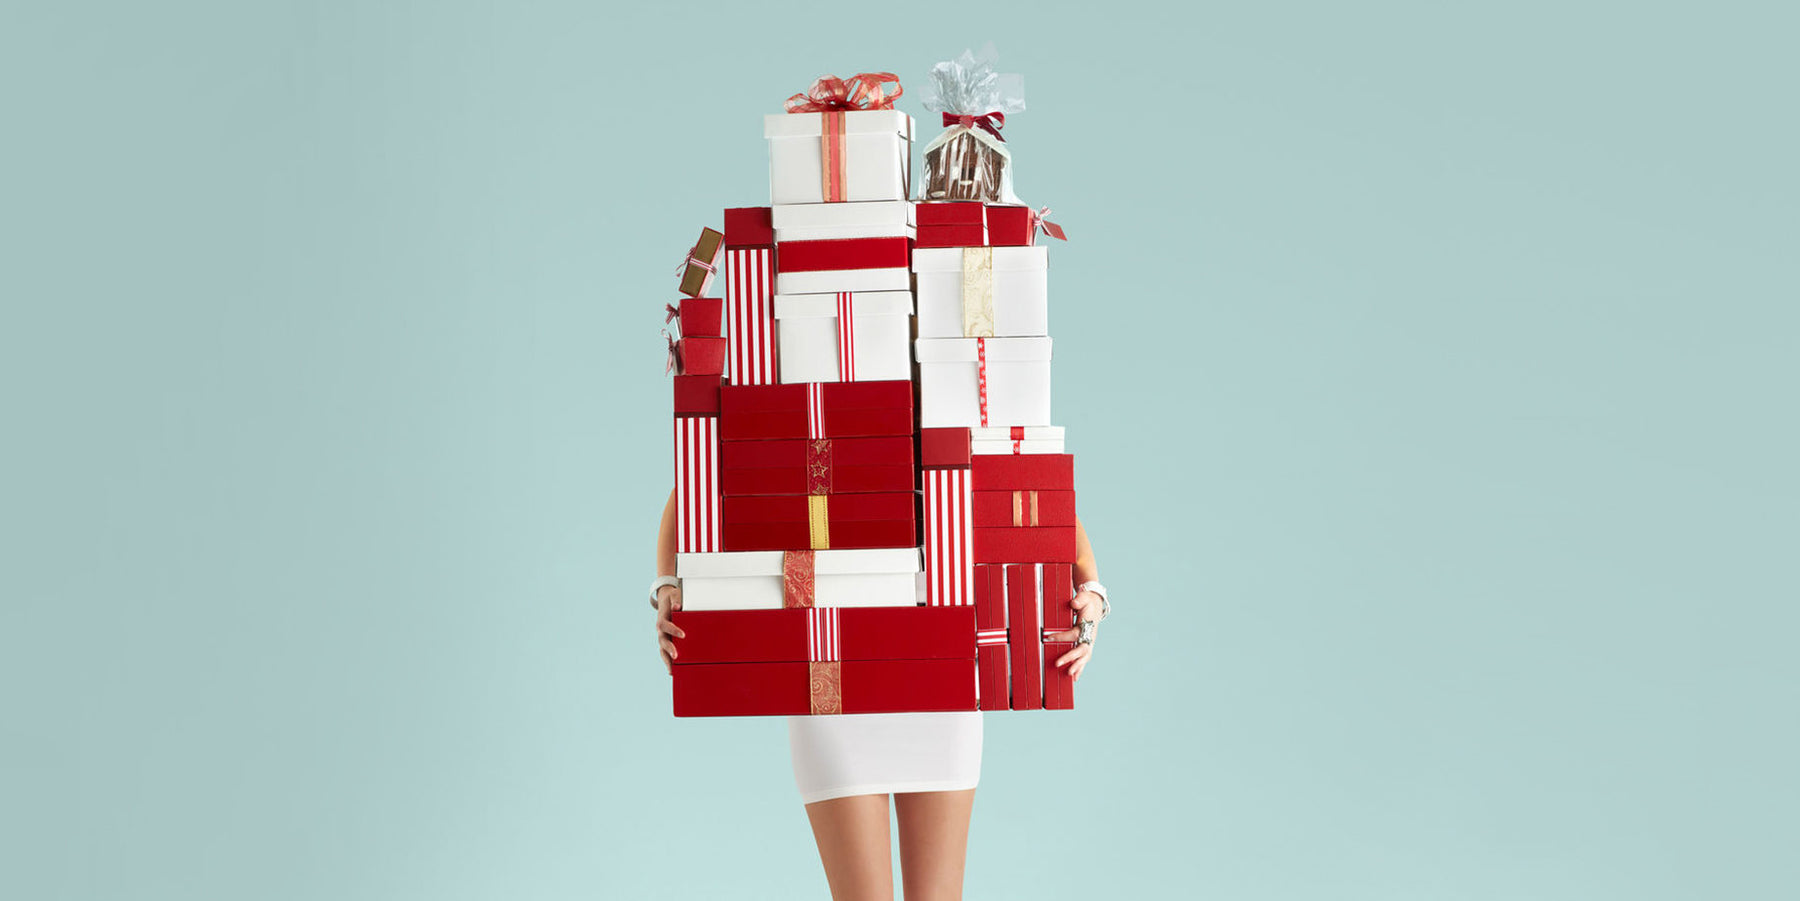 5 standout special offers to boost your holiday sales